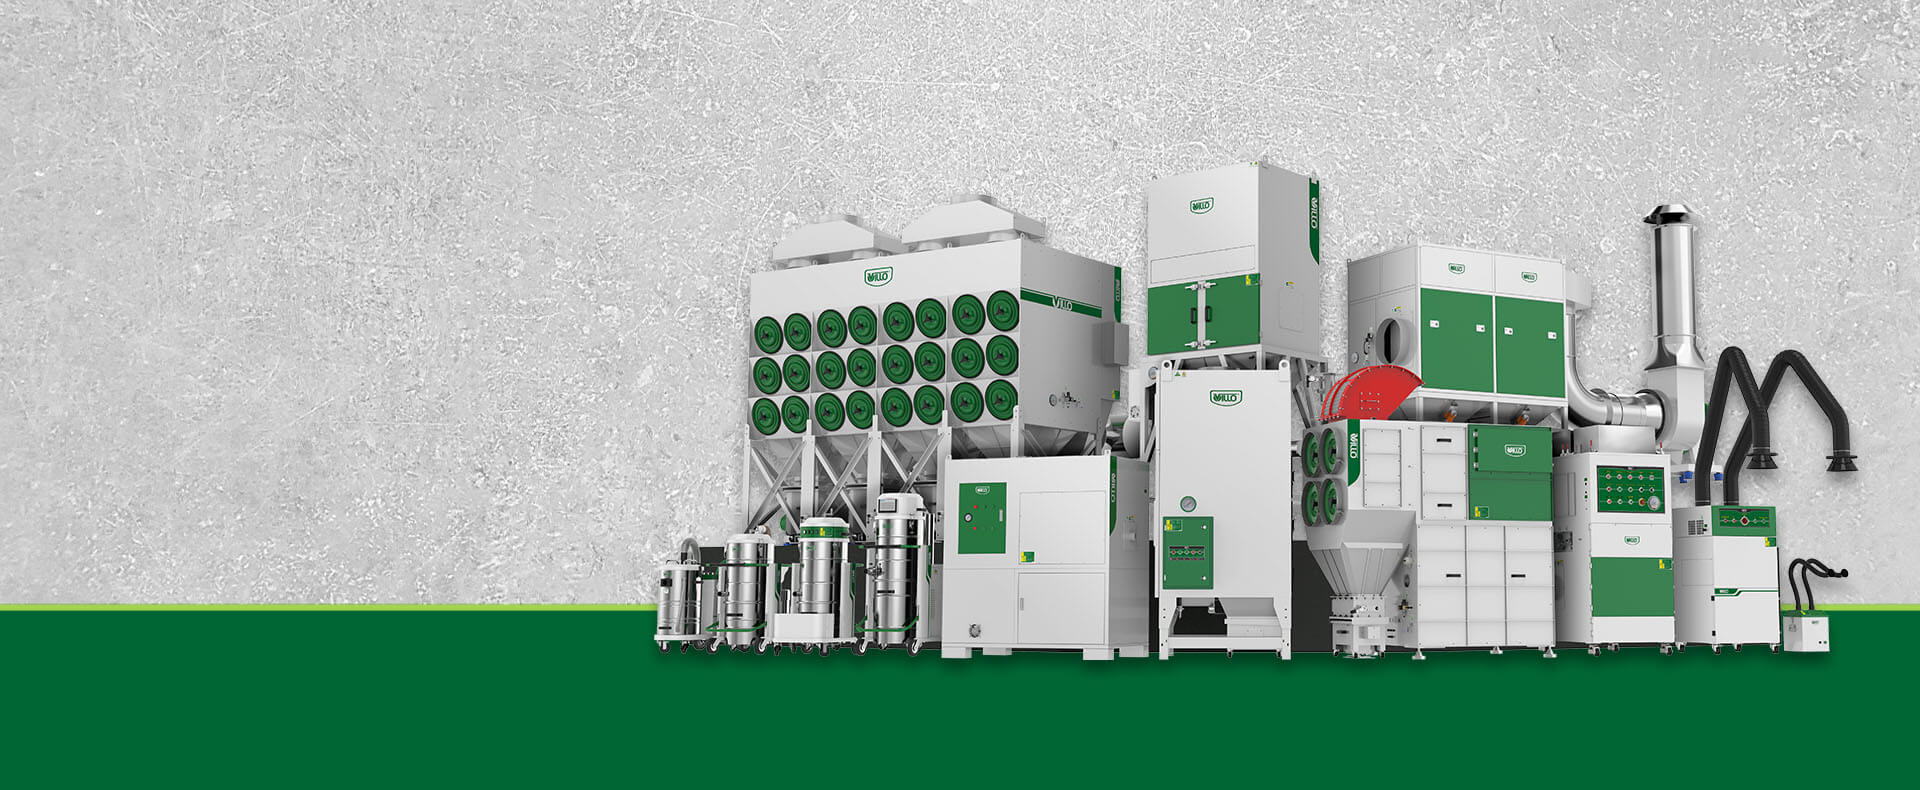 Industrial Dust Collector In Chemical Industry